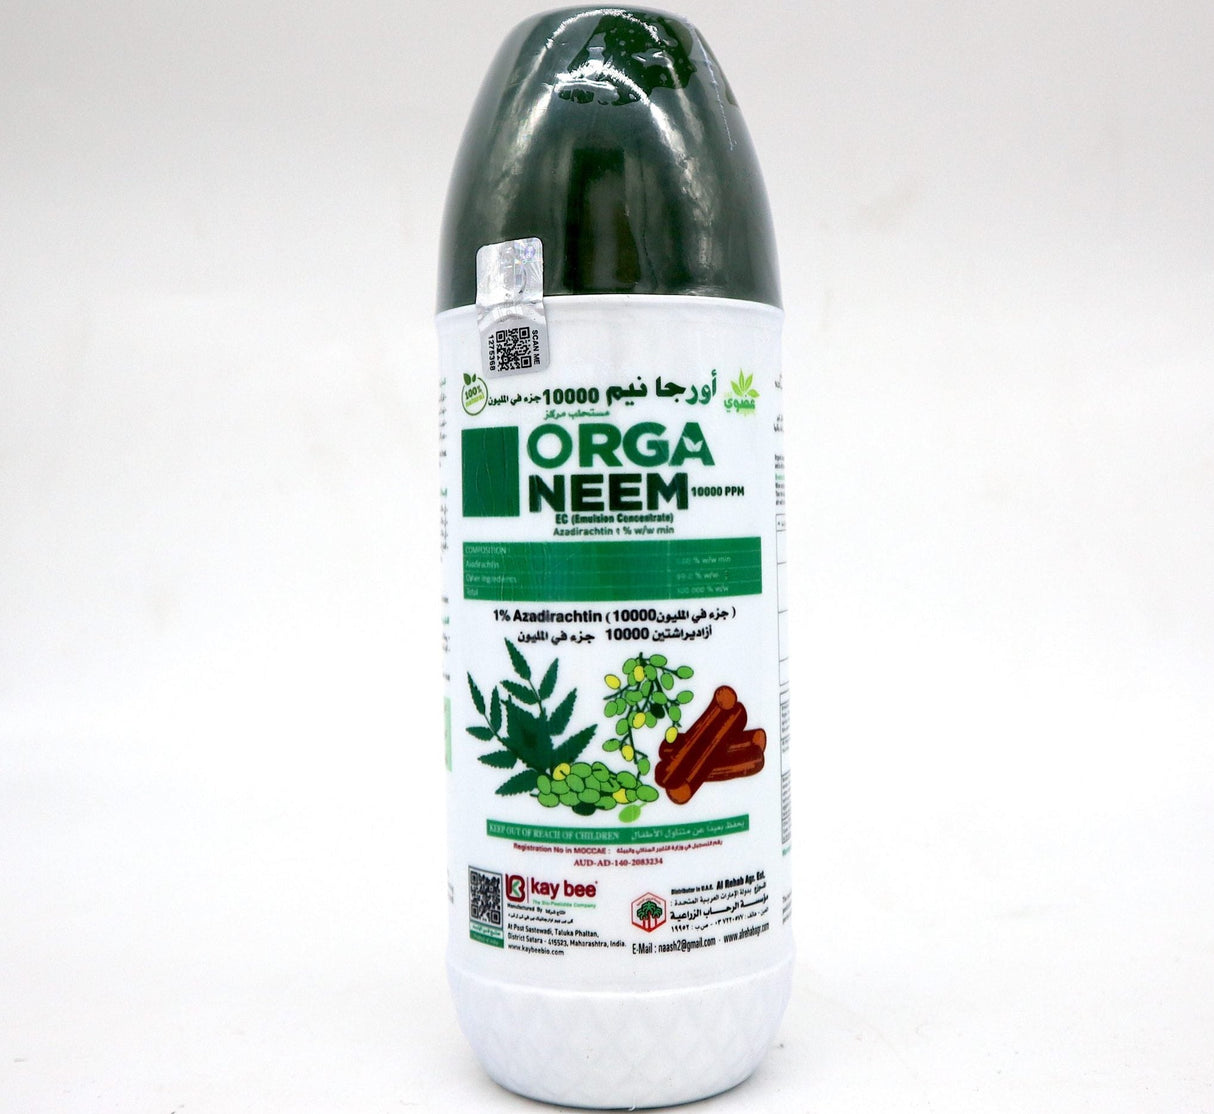 ORGA Neem 10000 PPM | Azadirachtin 1% | MOCCAE Approved Organic Insecticides 500ml